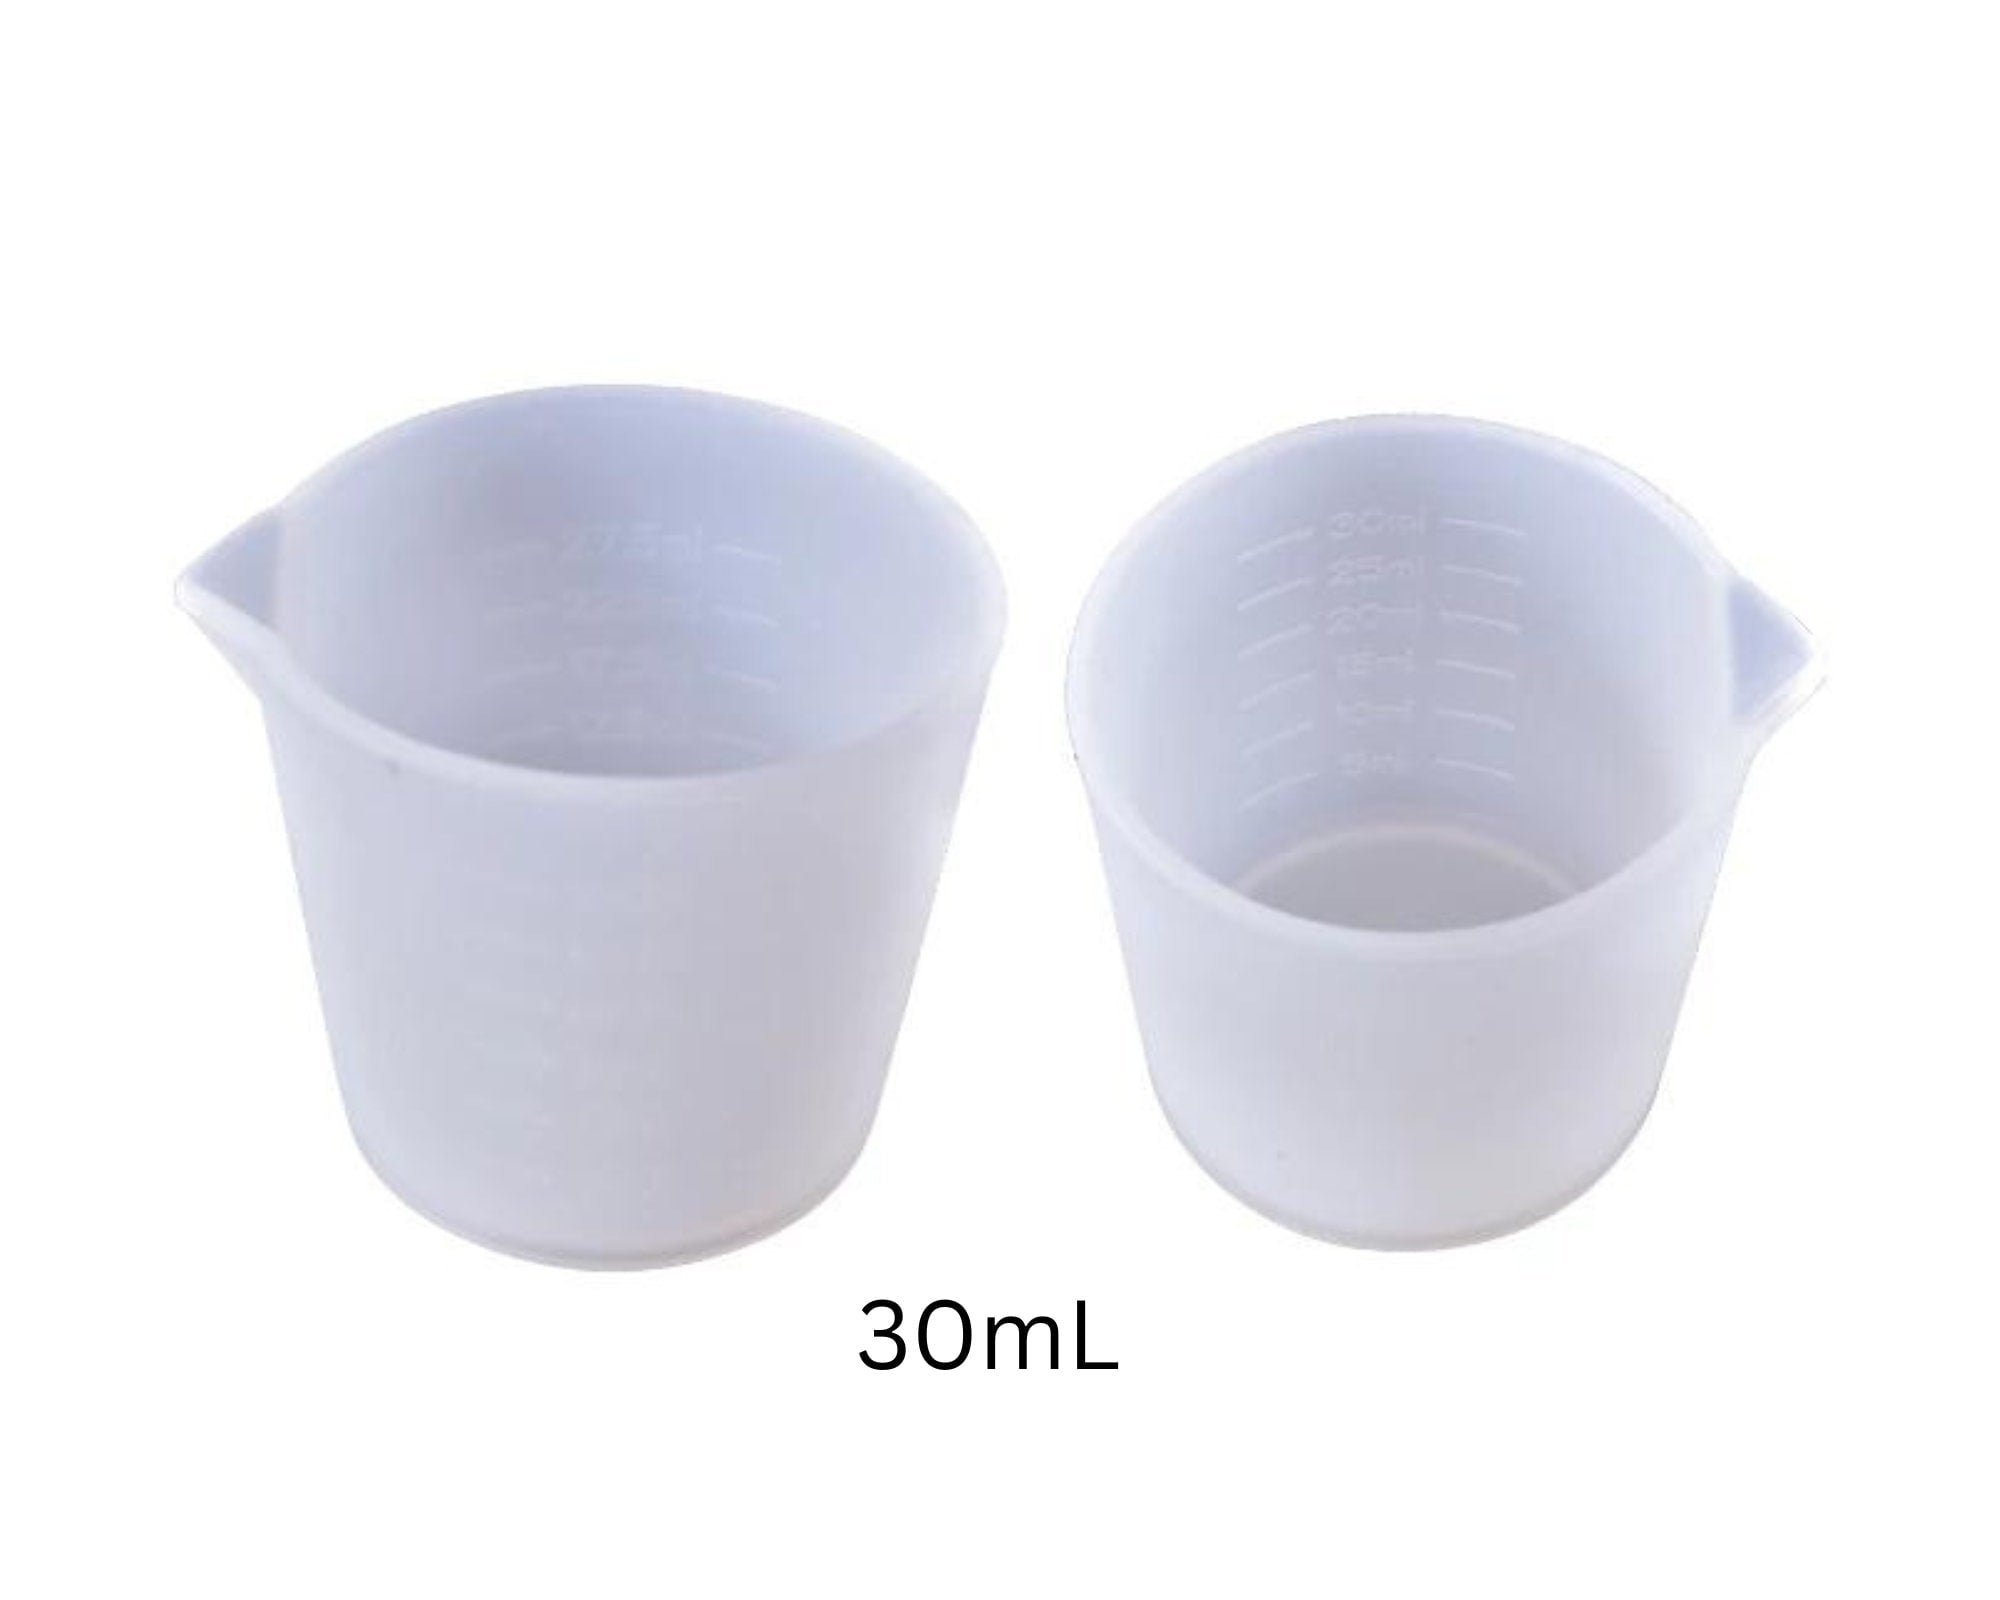 5pcs small silicone beaker, 30mL reusable silicone beaker, Epoxy Resin measuring cup, resin making supplies, DIY resin jewelry, resin tools